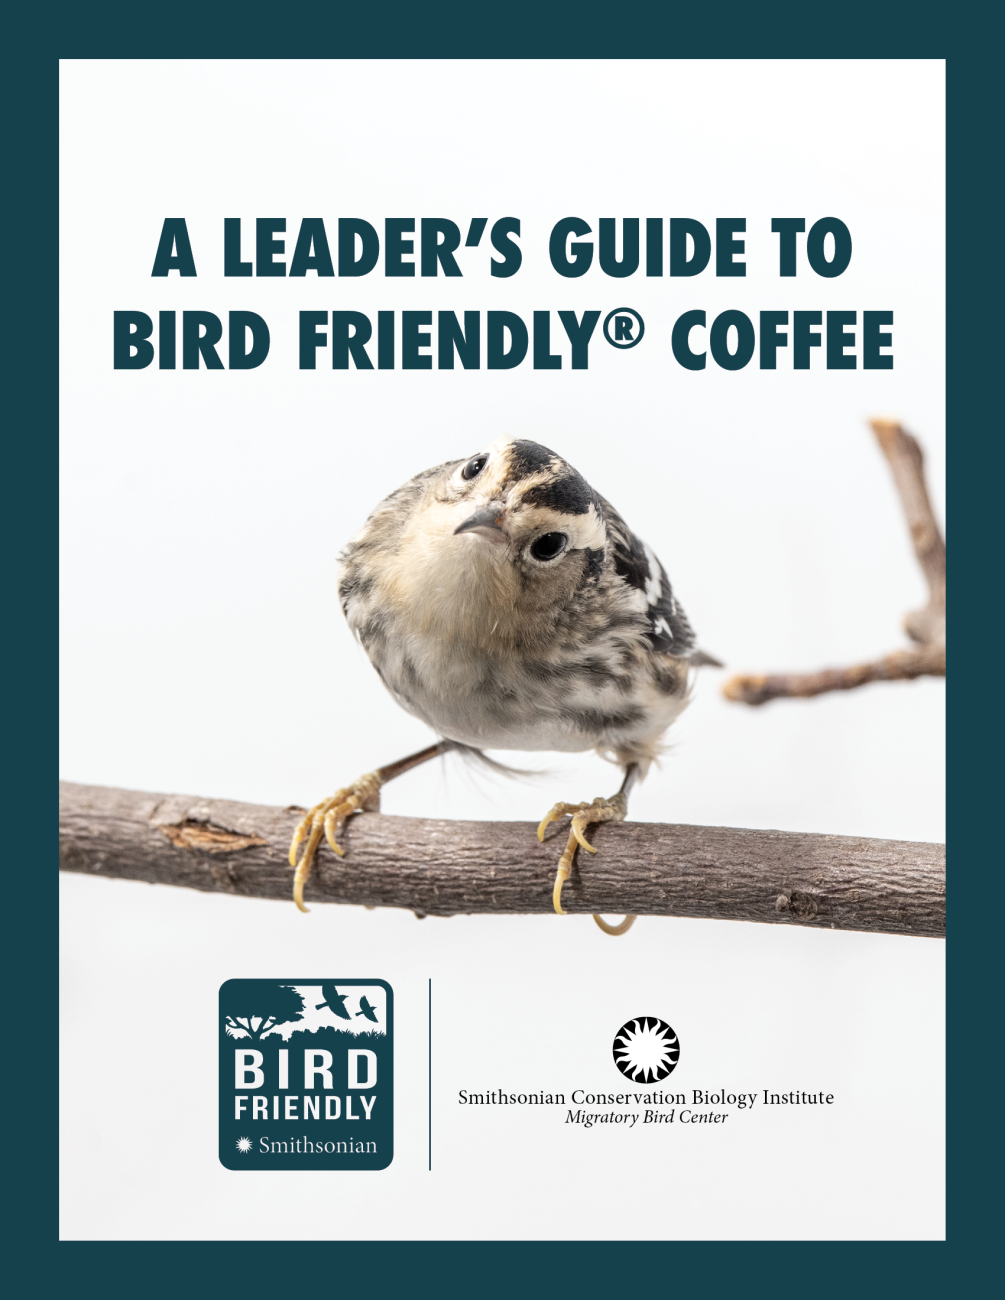 The first page of the "A Leader's Guide to Bird Friendly Coffee" toolkit featuring a wood thrush bird perched on a branch, and the Bird Friendly and Smithsonian Conservation Biology Institute logos